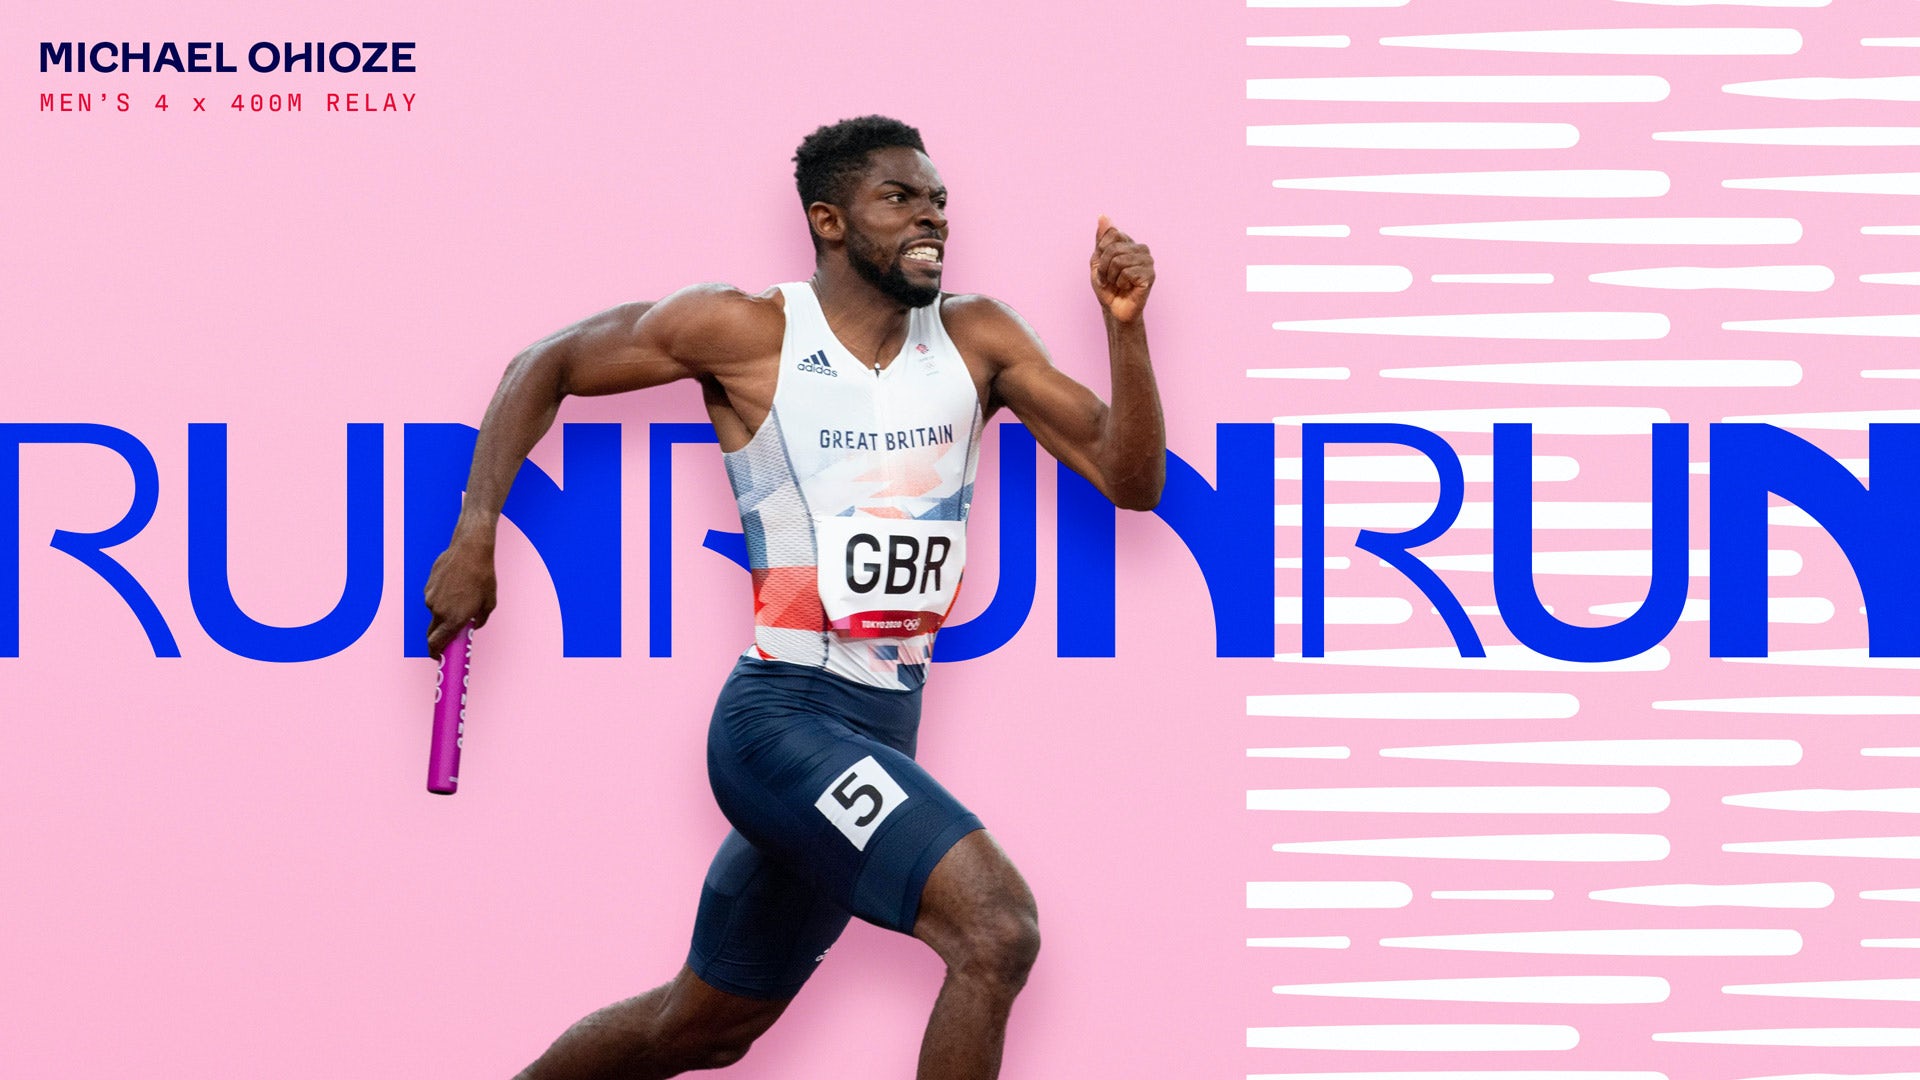 Graphic featuring the Team GB rebrand, featuring a cut out photograph and name of Olympian Michael Ohioze running with a relay baton, shown on a pale pink background with horizontal white striped pattern, and the words 'Run' repeated in a row in a blue font of different weights